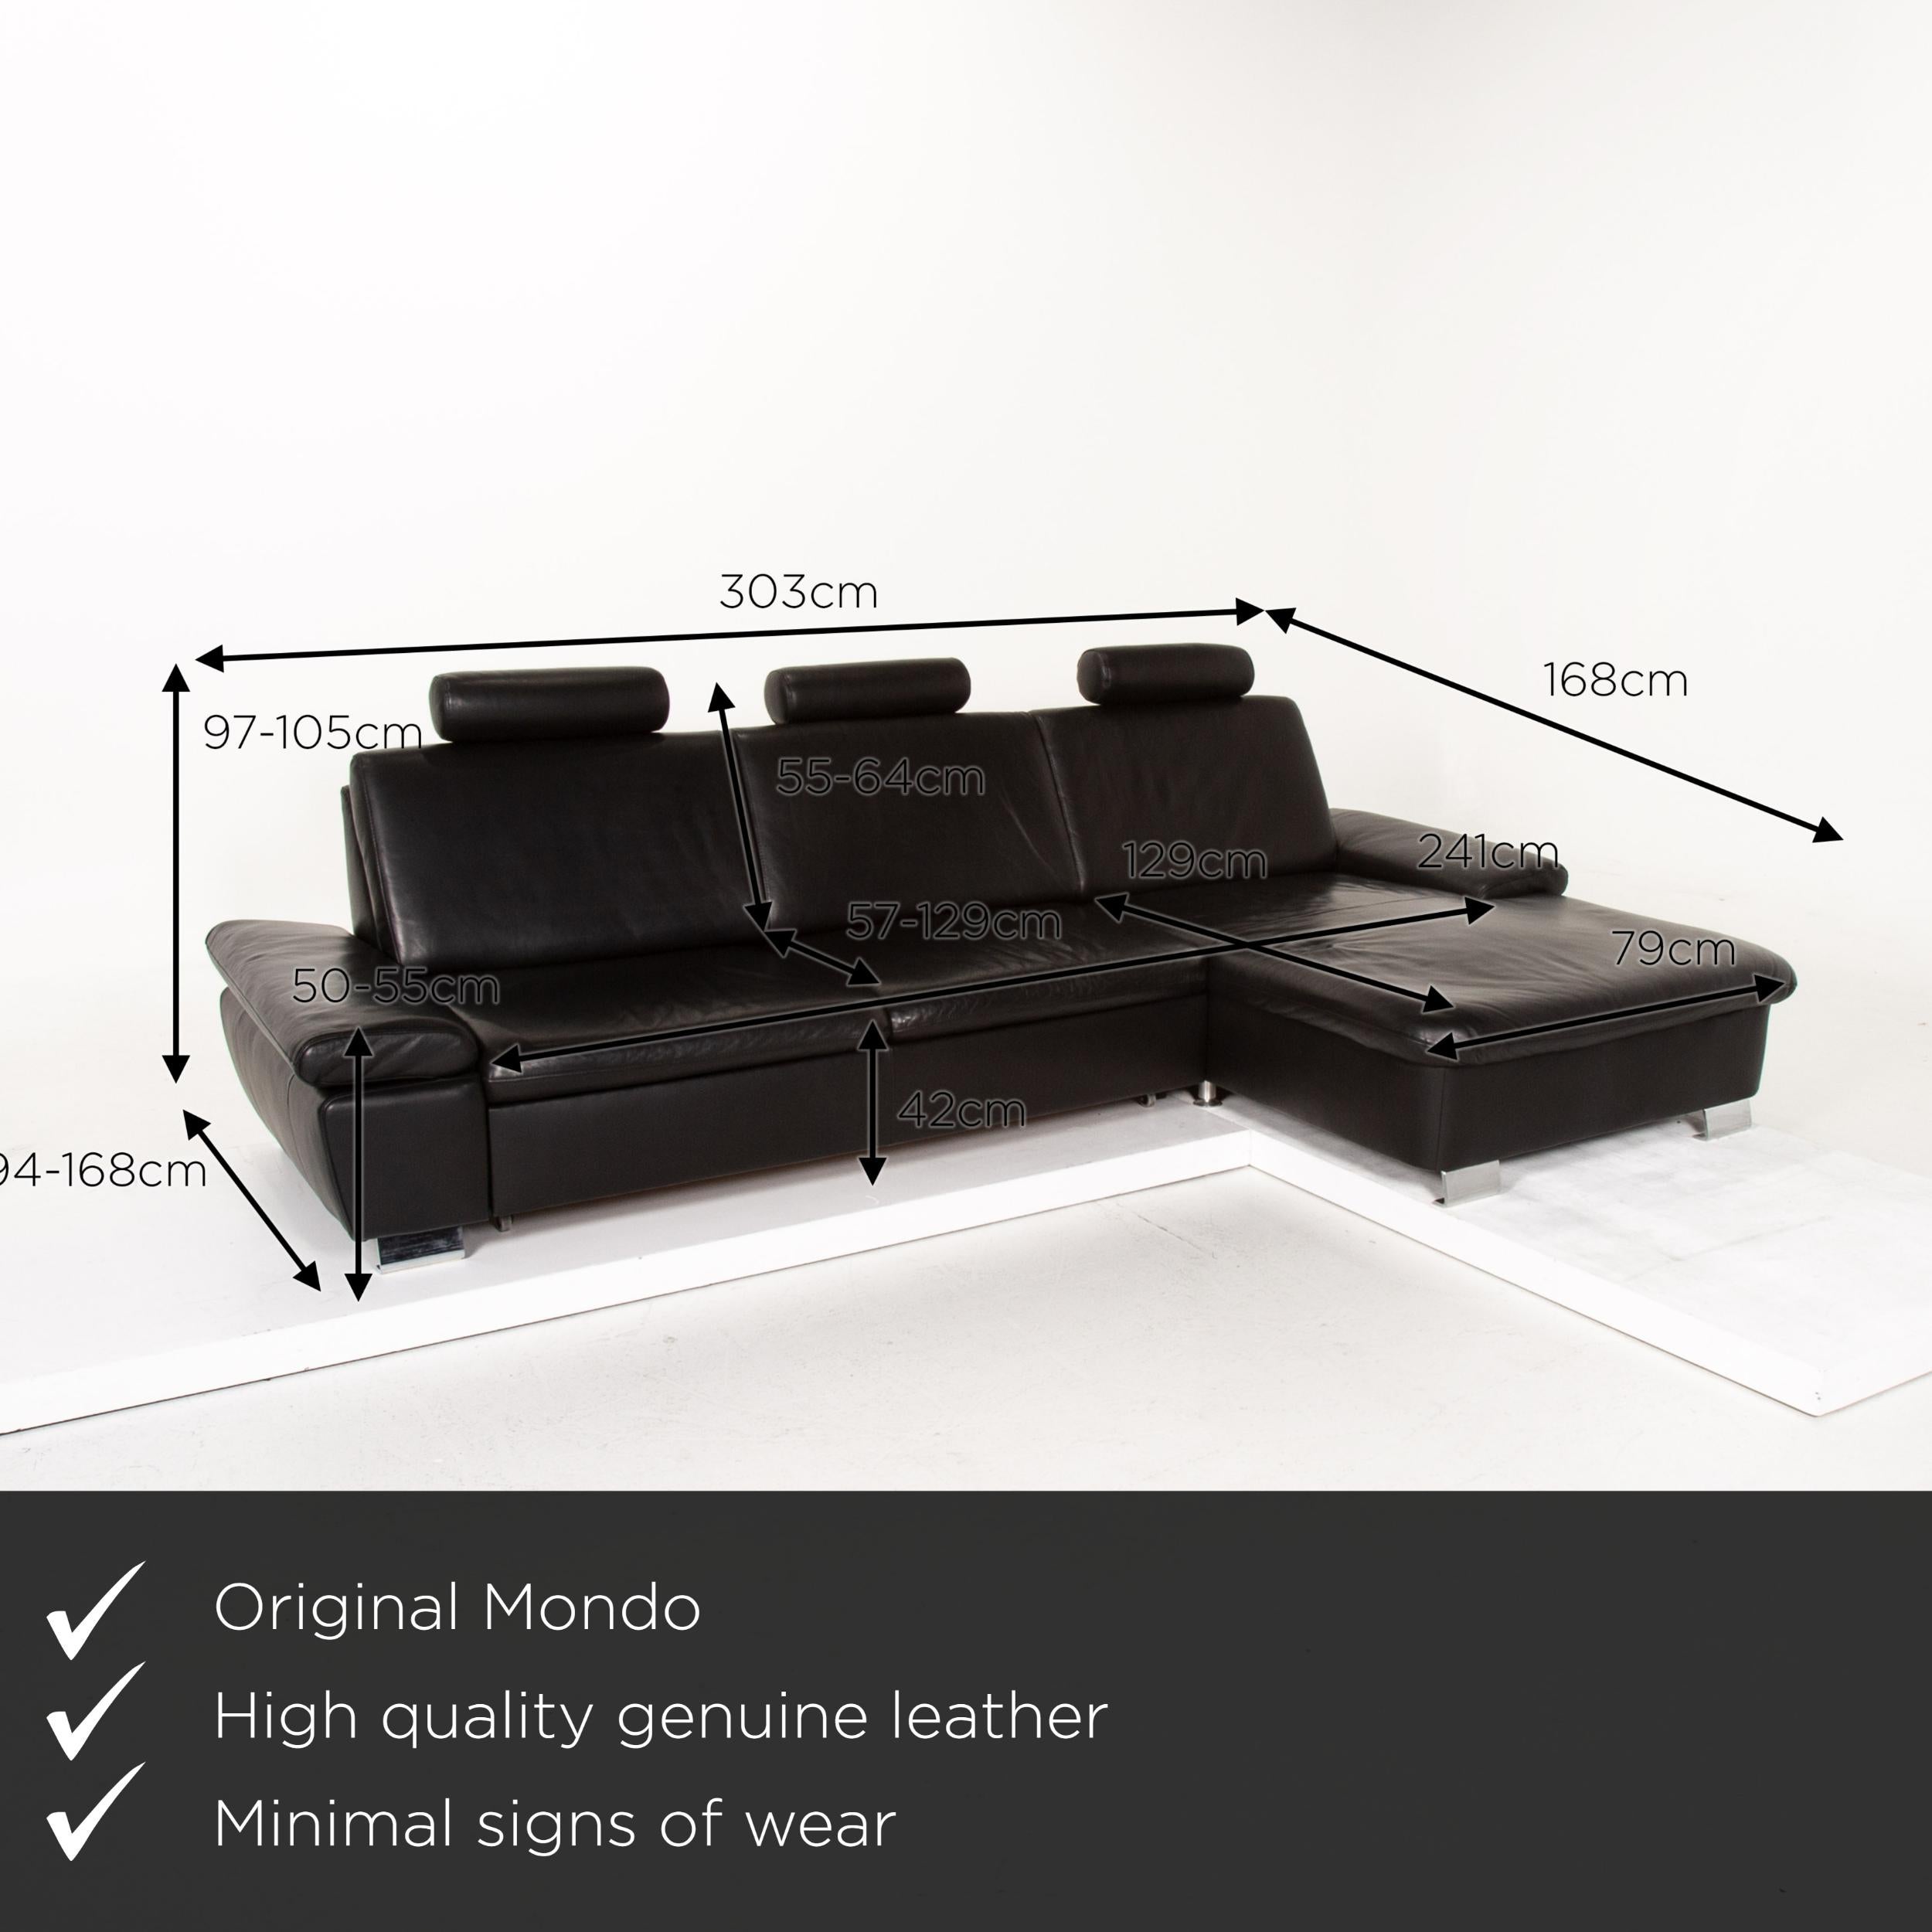 We present to you a Mondo leather corner sofa black sofa function sleep function sofa bed couch.

 

 Product measurements in centimeters:
 

Depth 94
Width 303
Height 97
Seat height 42
Rest height 50
Seat depth 57
Seat width 241
Back